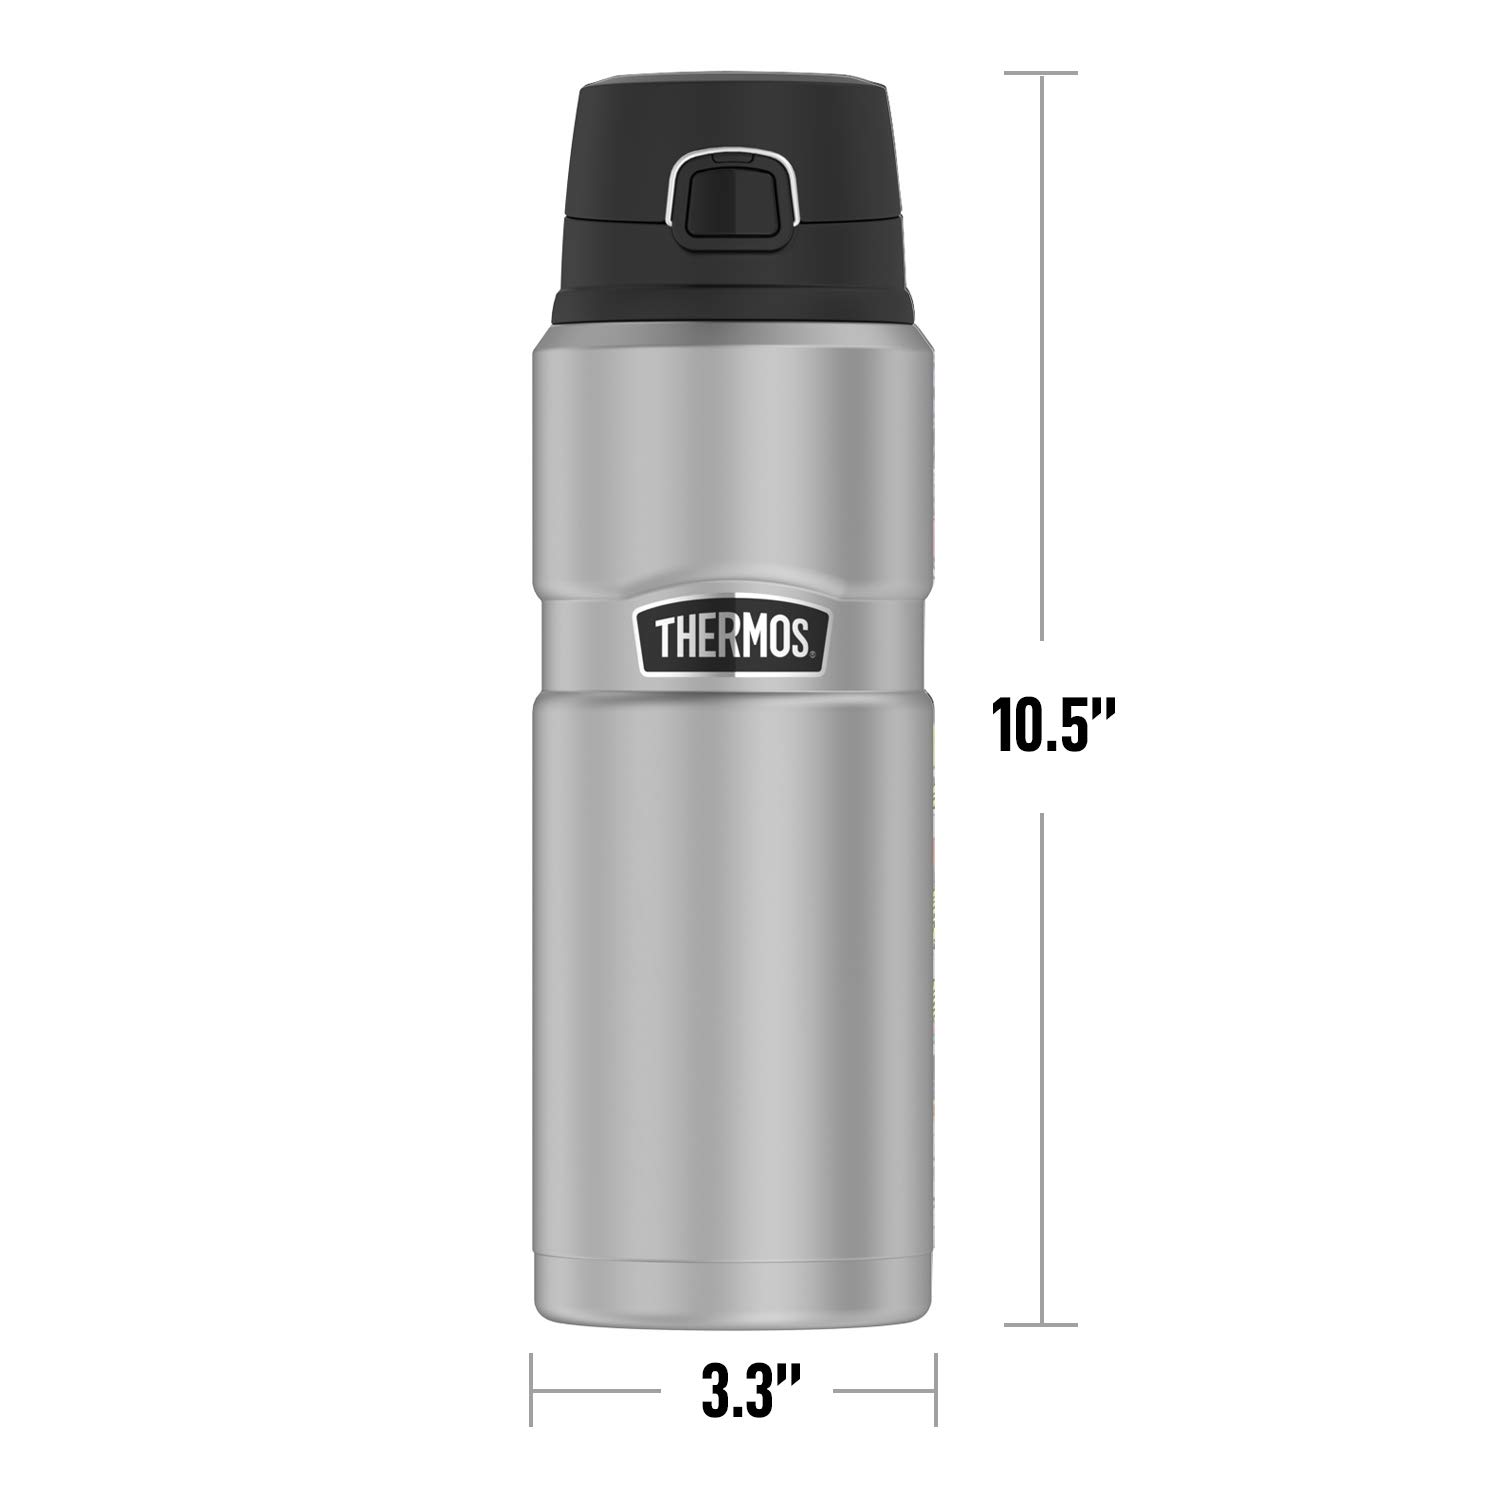 THERMOS University of Nebraska at Omaha OFFICIAL Jersey Stripes STAINLESS KING Stainless Steel Drink Bottle, Vacuum insulated & Double Wall, 24oz